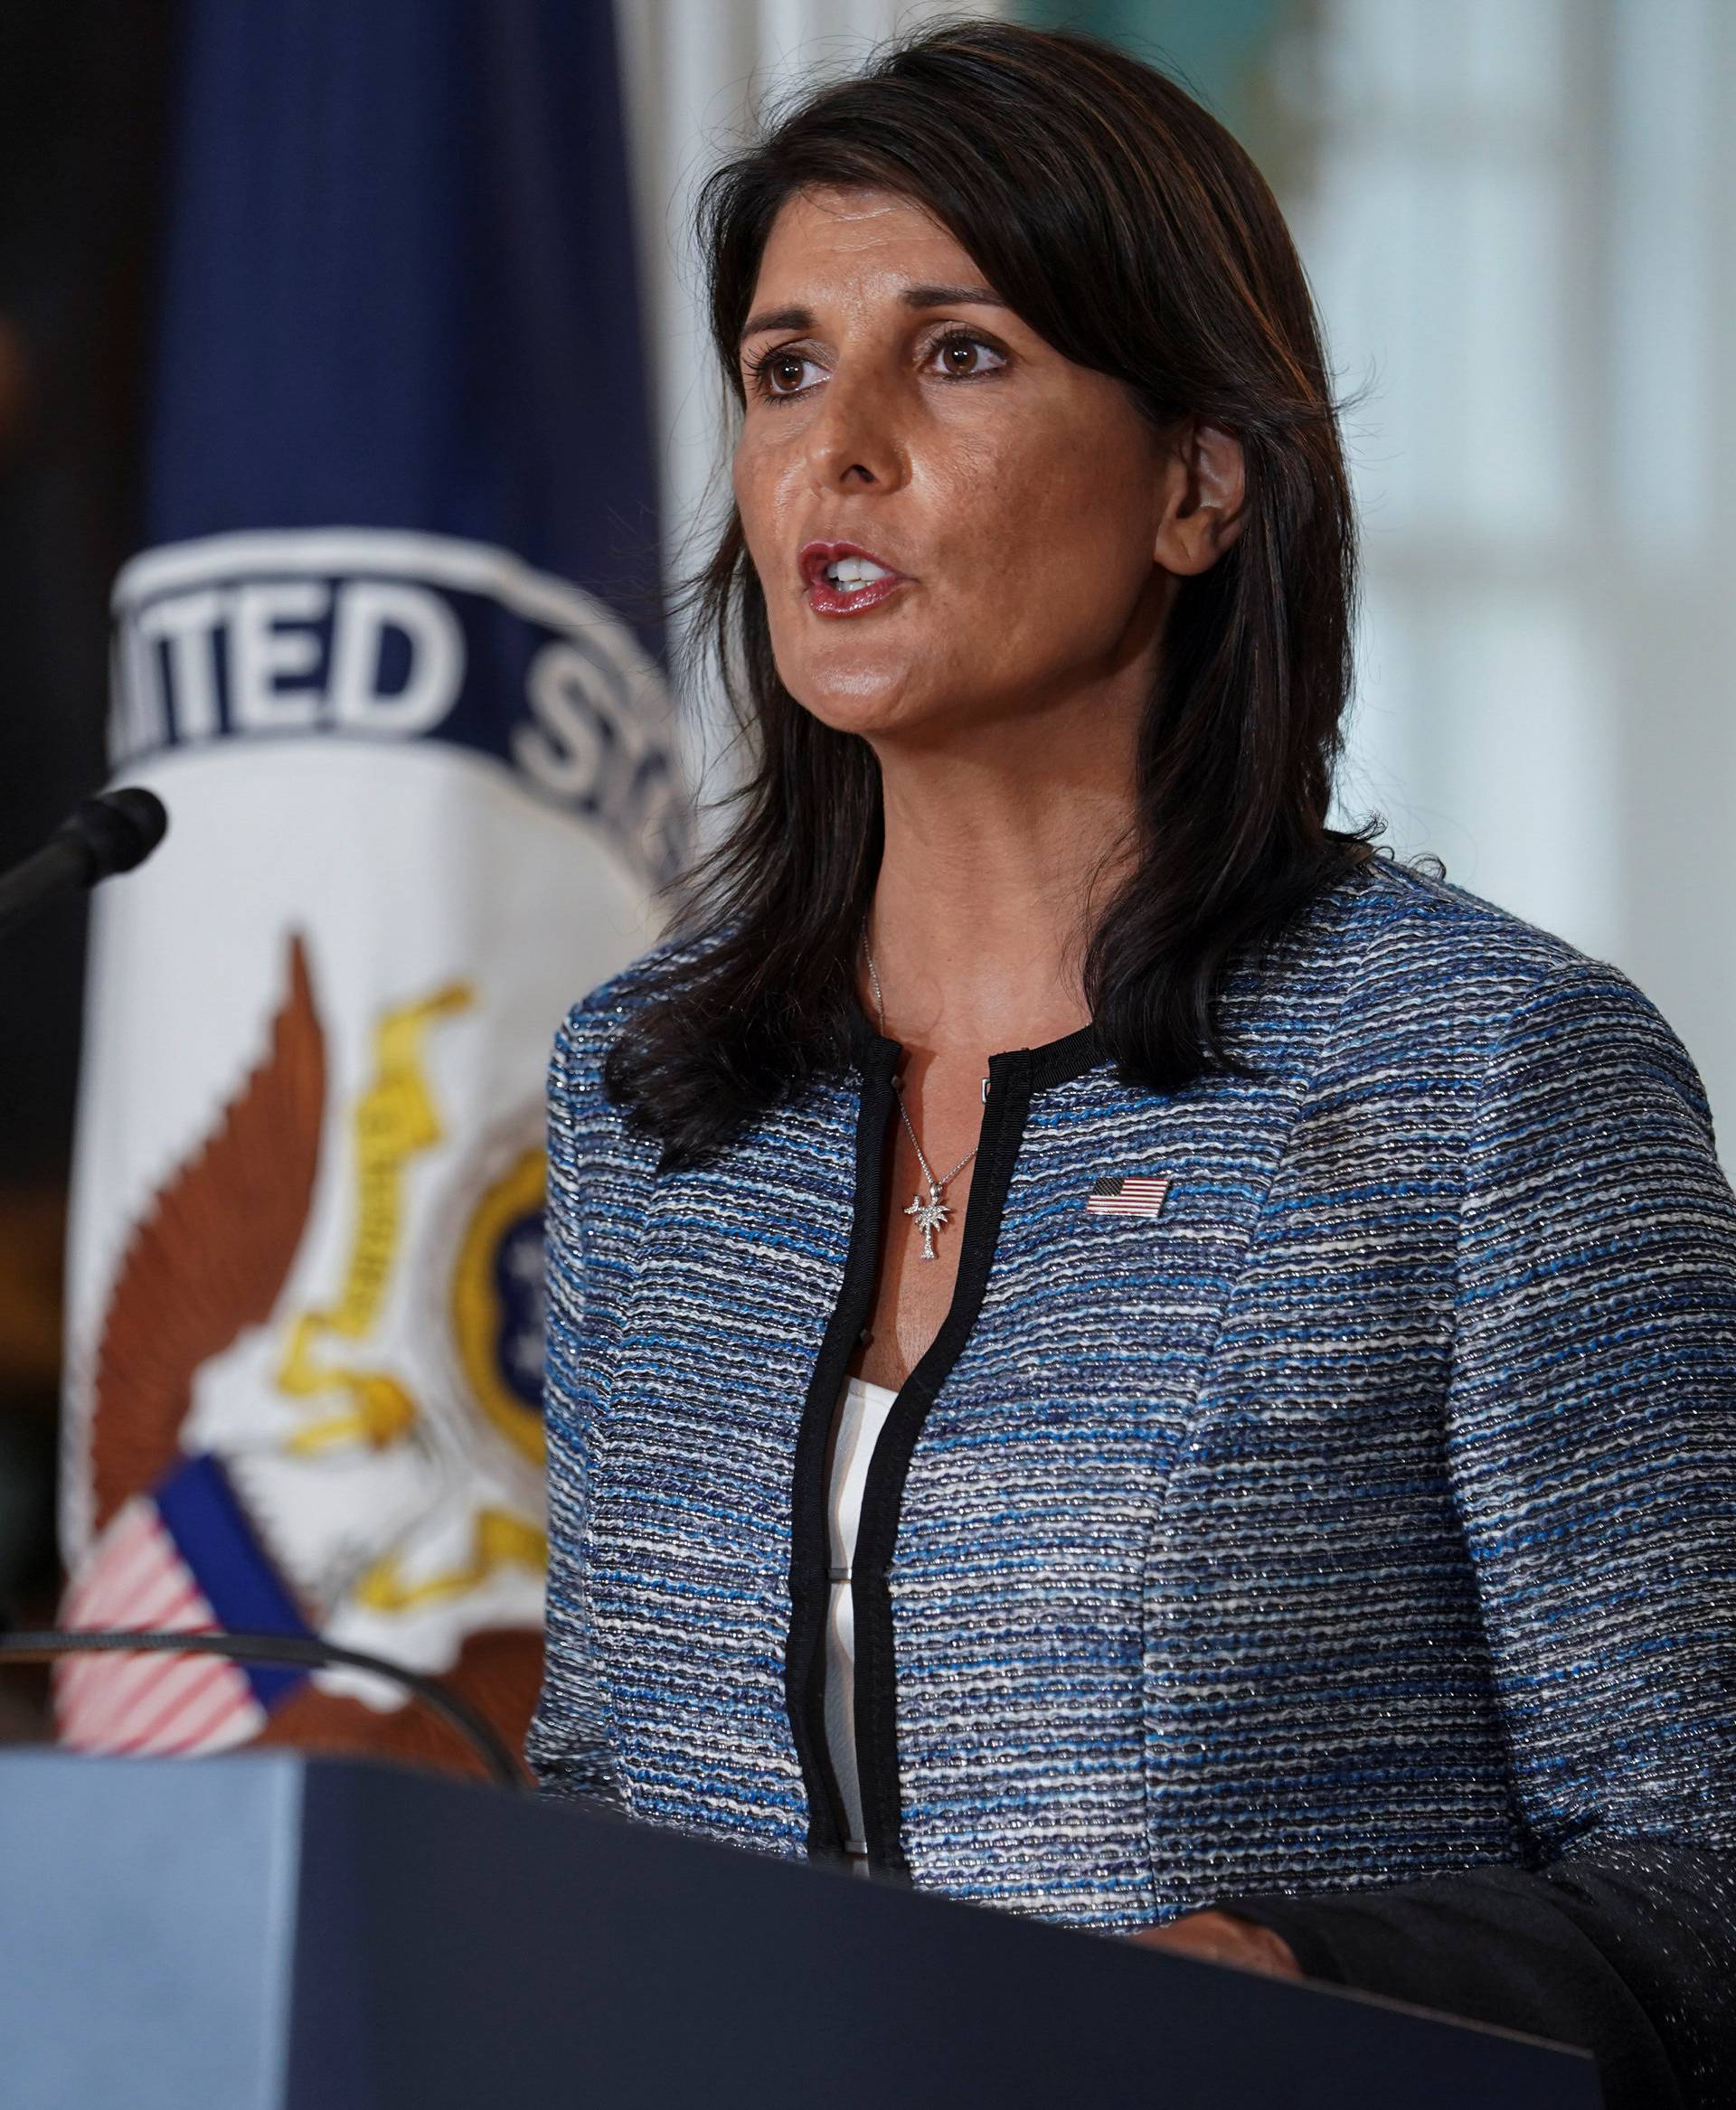 U.S. Ambassador to the United Nations Nikki Haley delivers remarks to the press together with U.S. Secretary of State Mike Pompeo, announcing the U.S.'s withdrawal from the U.N's Human Rights Council at the Department of State in Washington